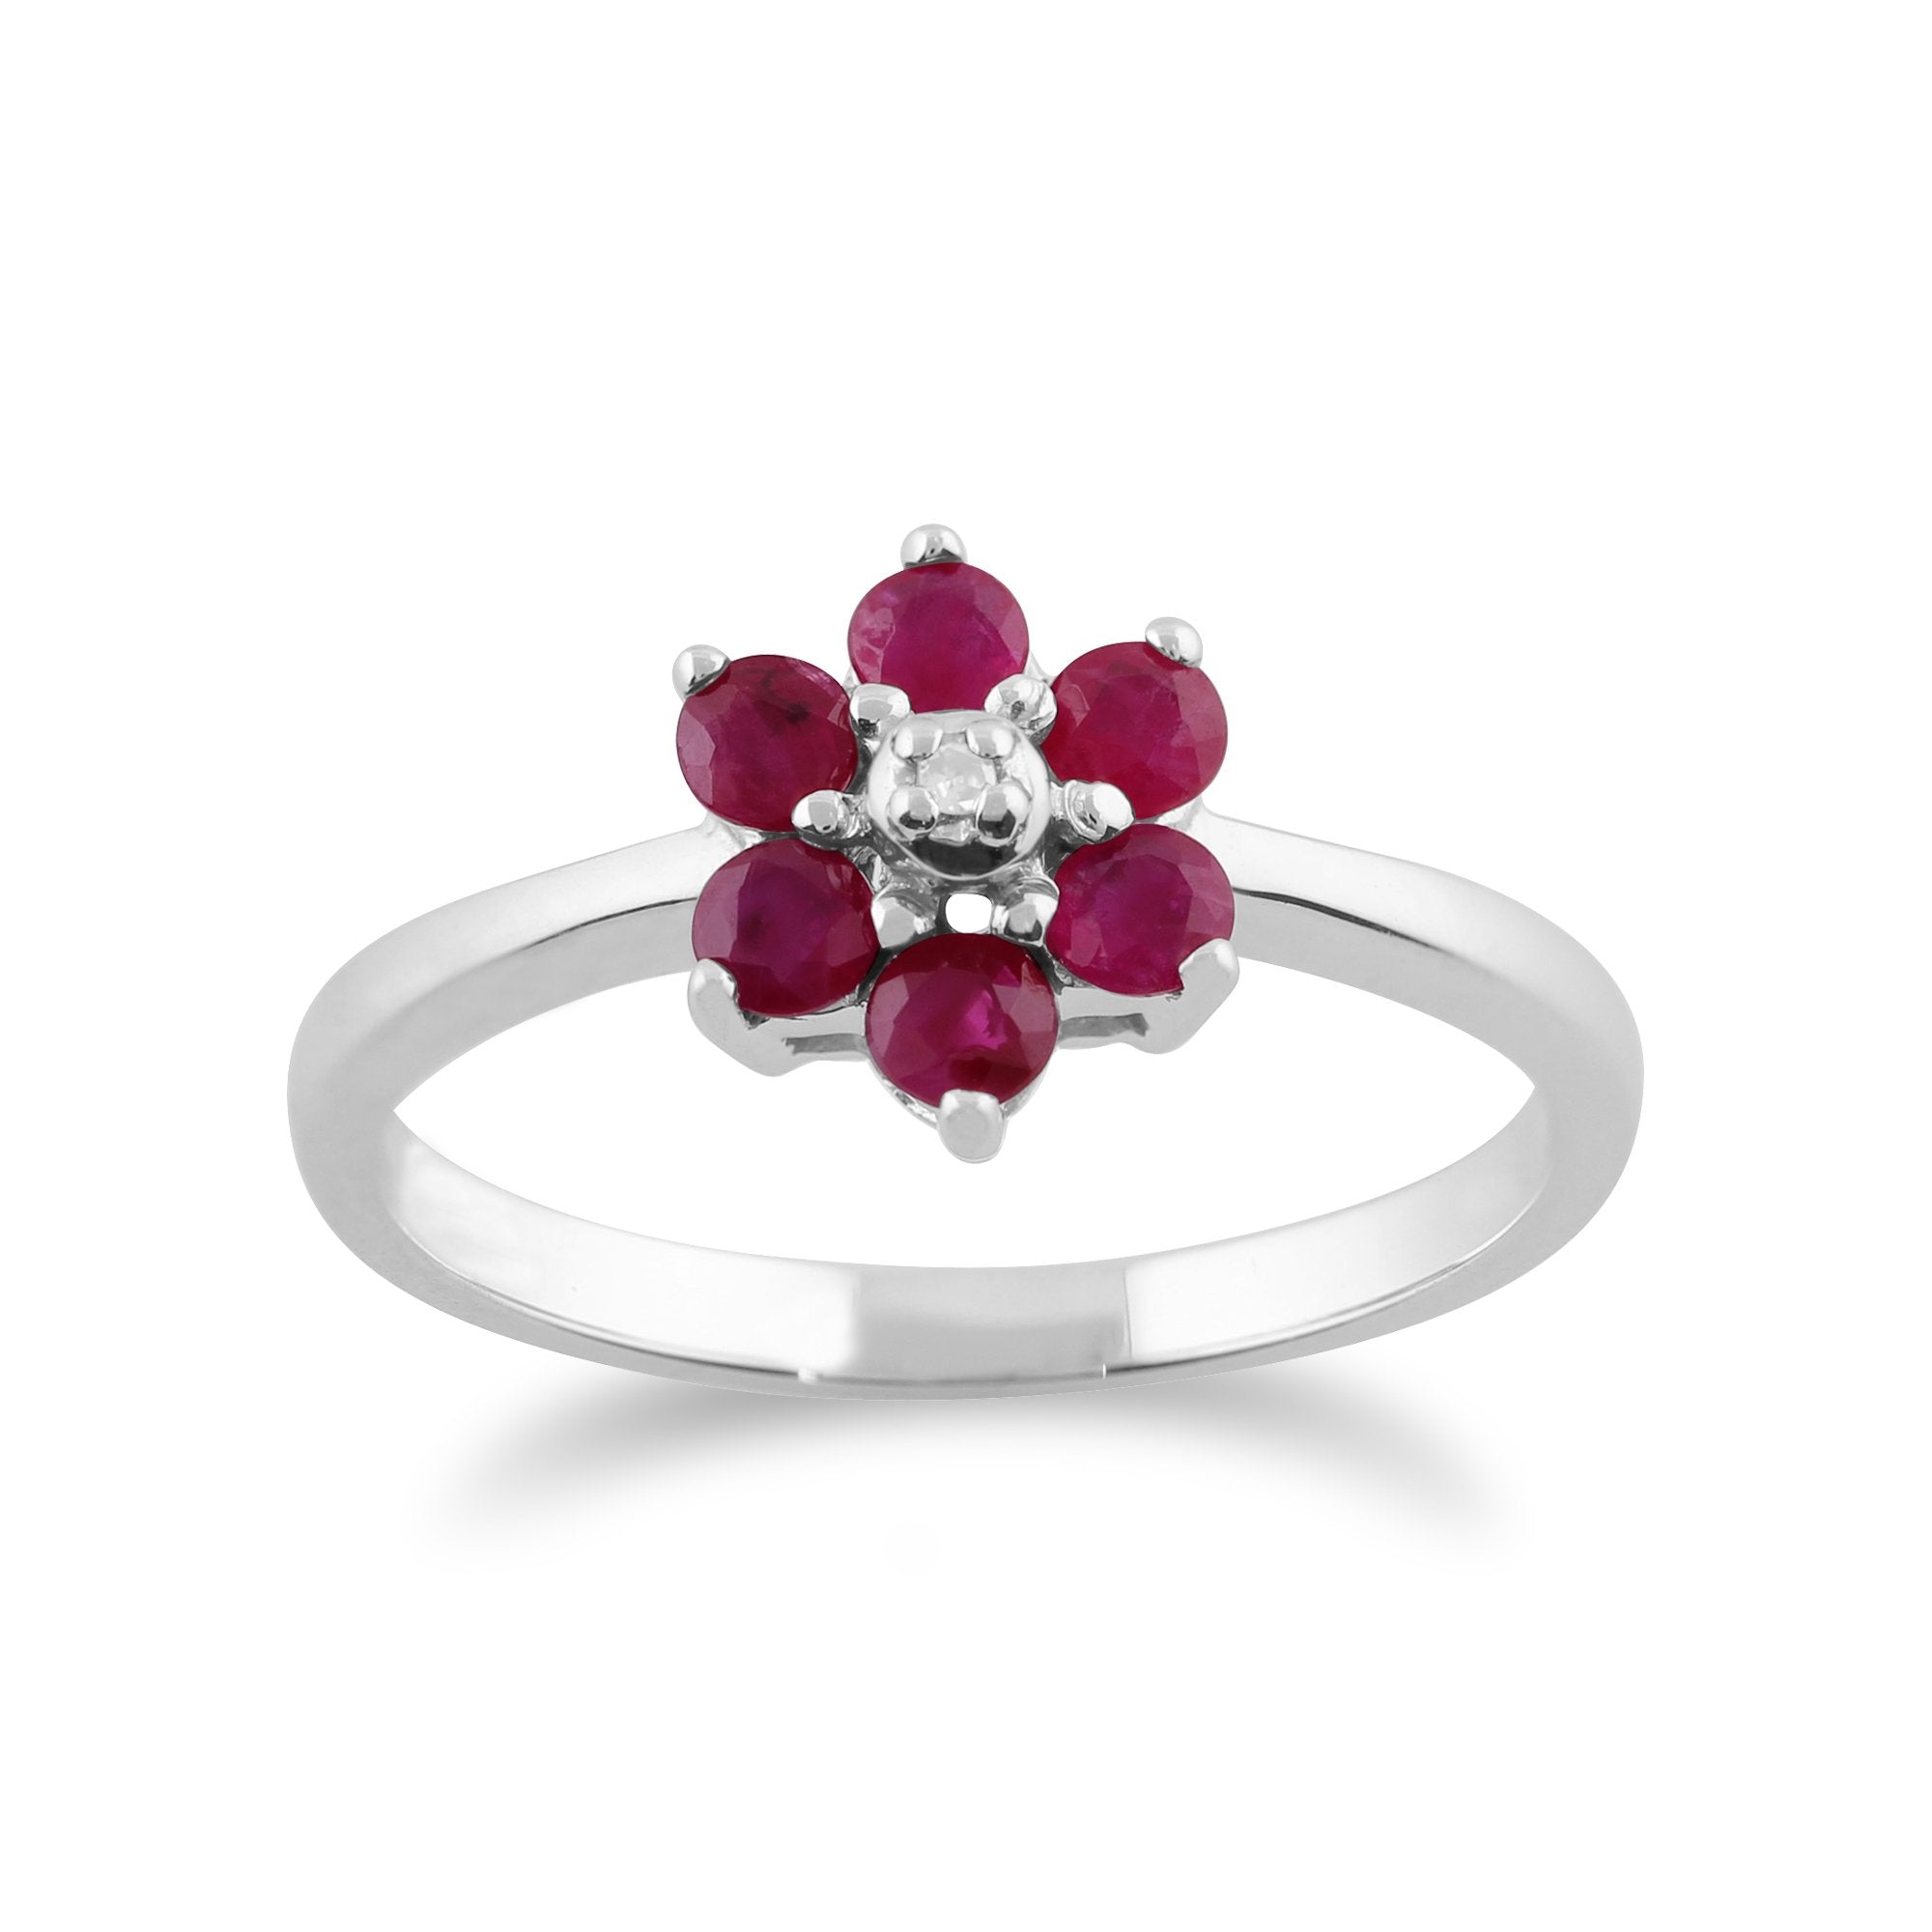 Floral Round Ruby & Diamond Cluster Ring in 9ct White Gold